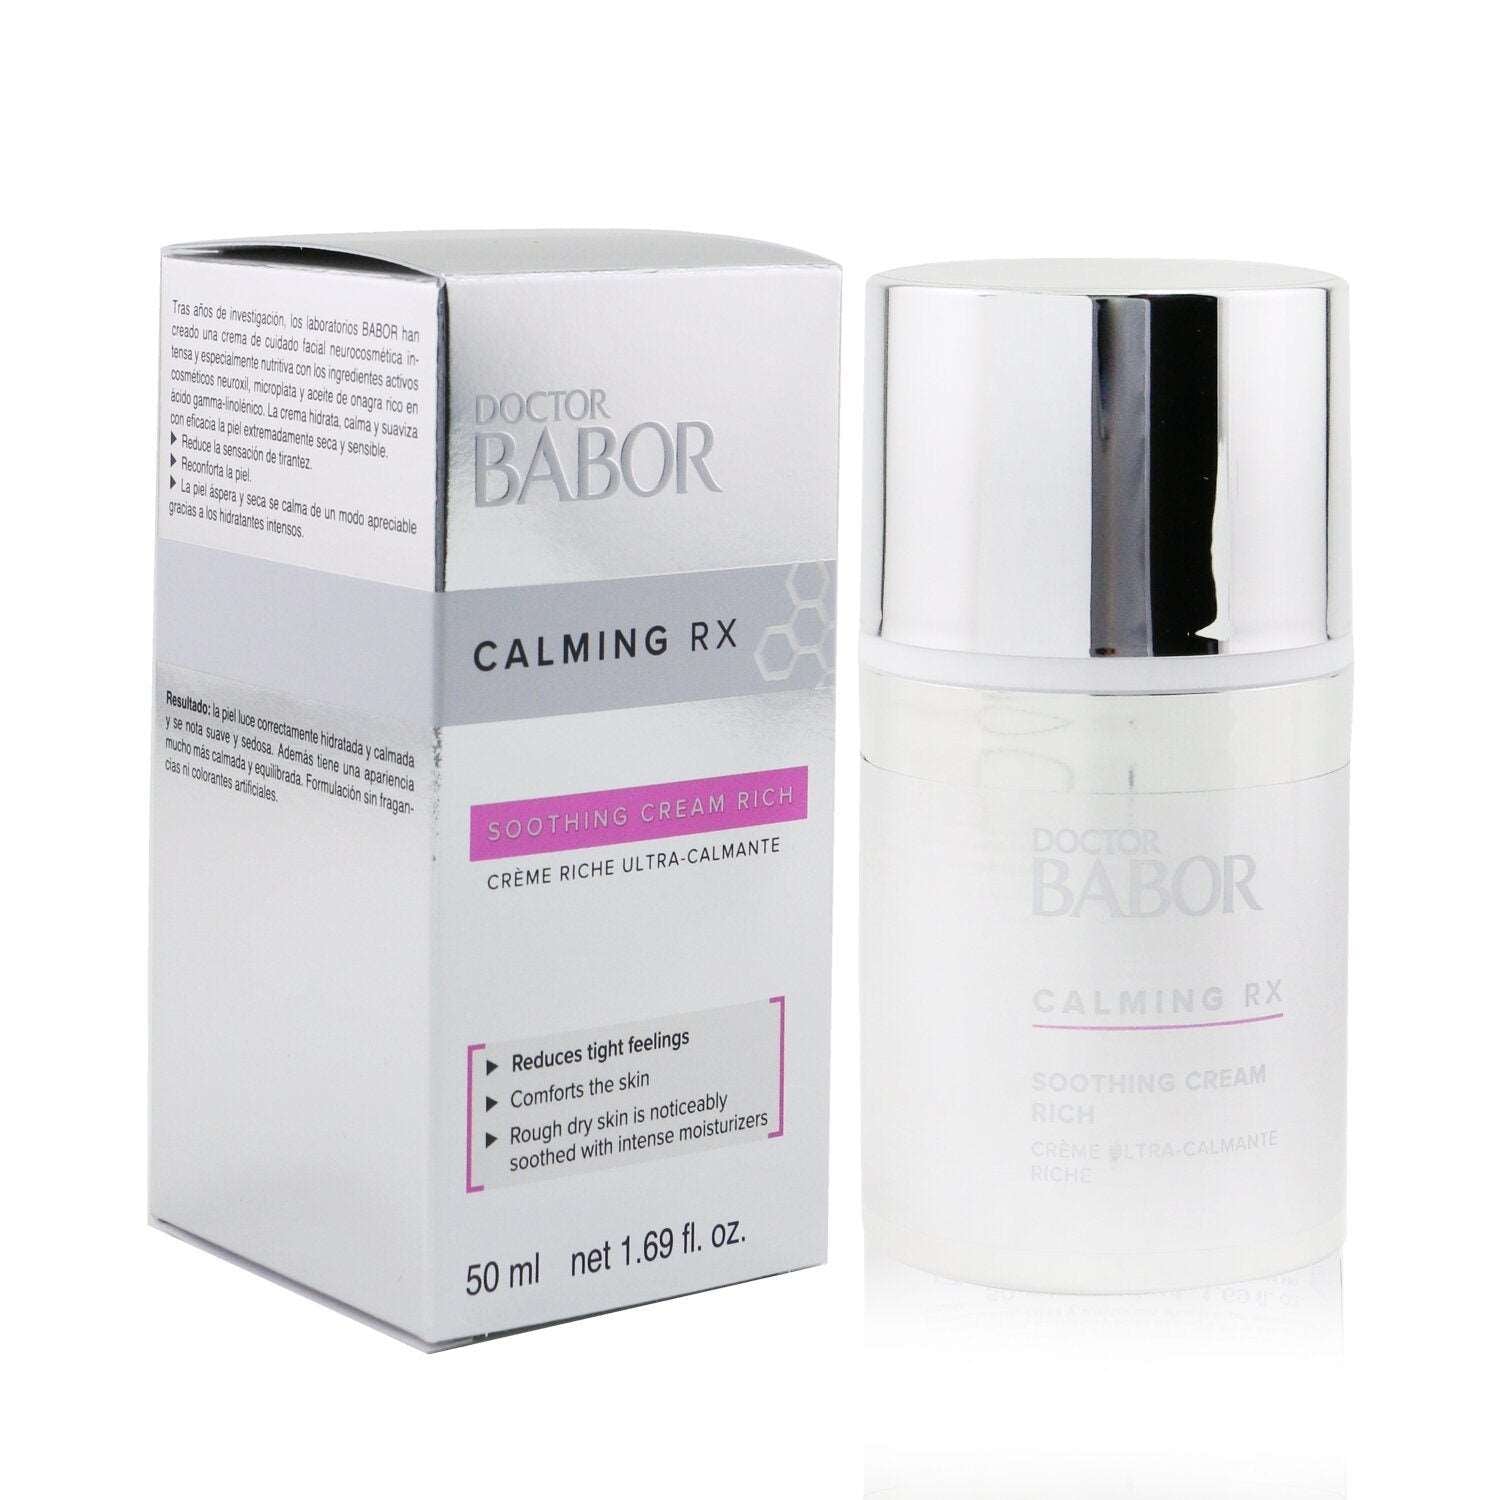 BABOR - Doctor Babor Calming Rx Soothing Cream Rich - 50ml/1.69oz 3P's Inclusive Beauty